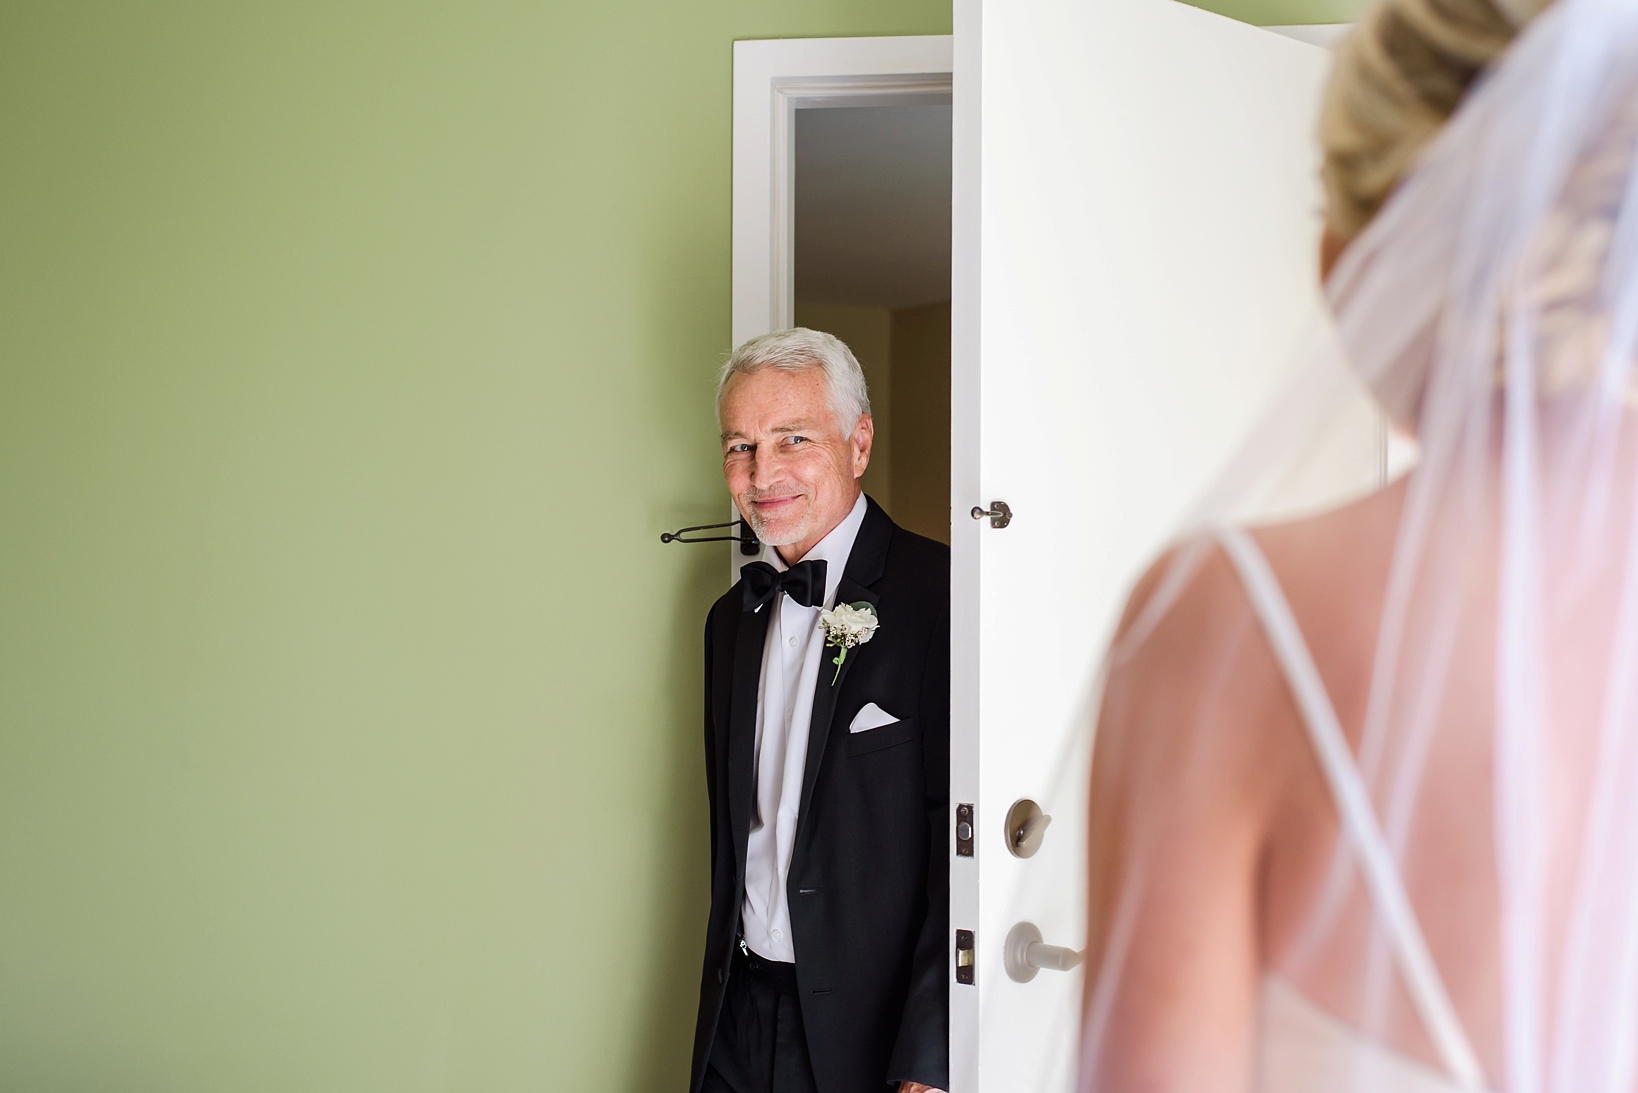 Father of the bride sees her for the very first time